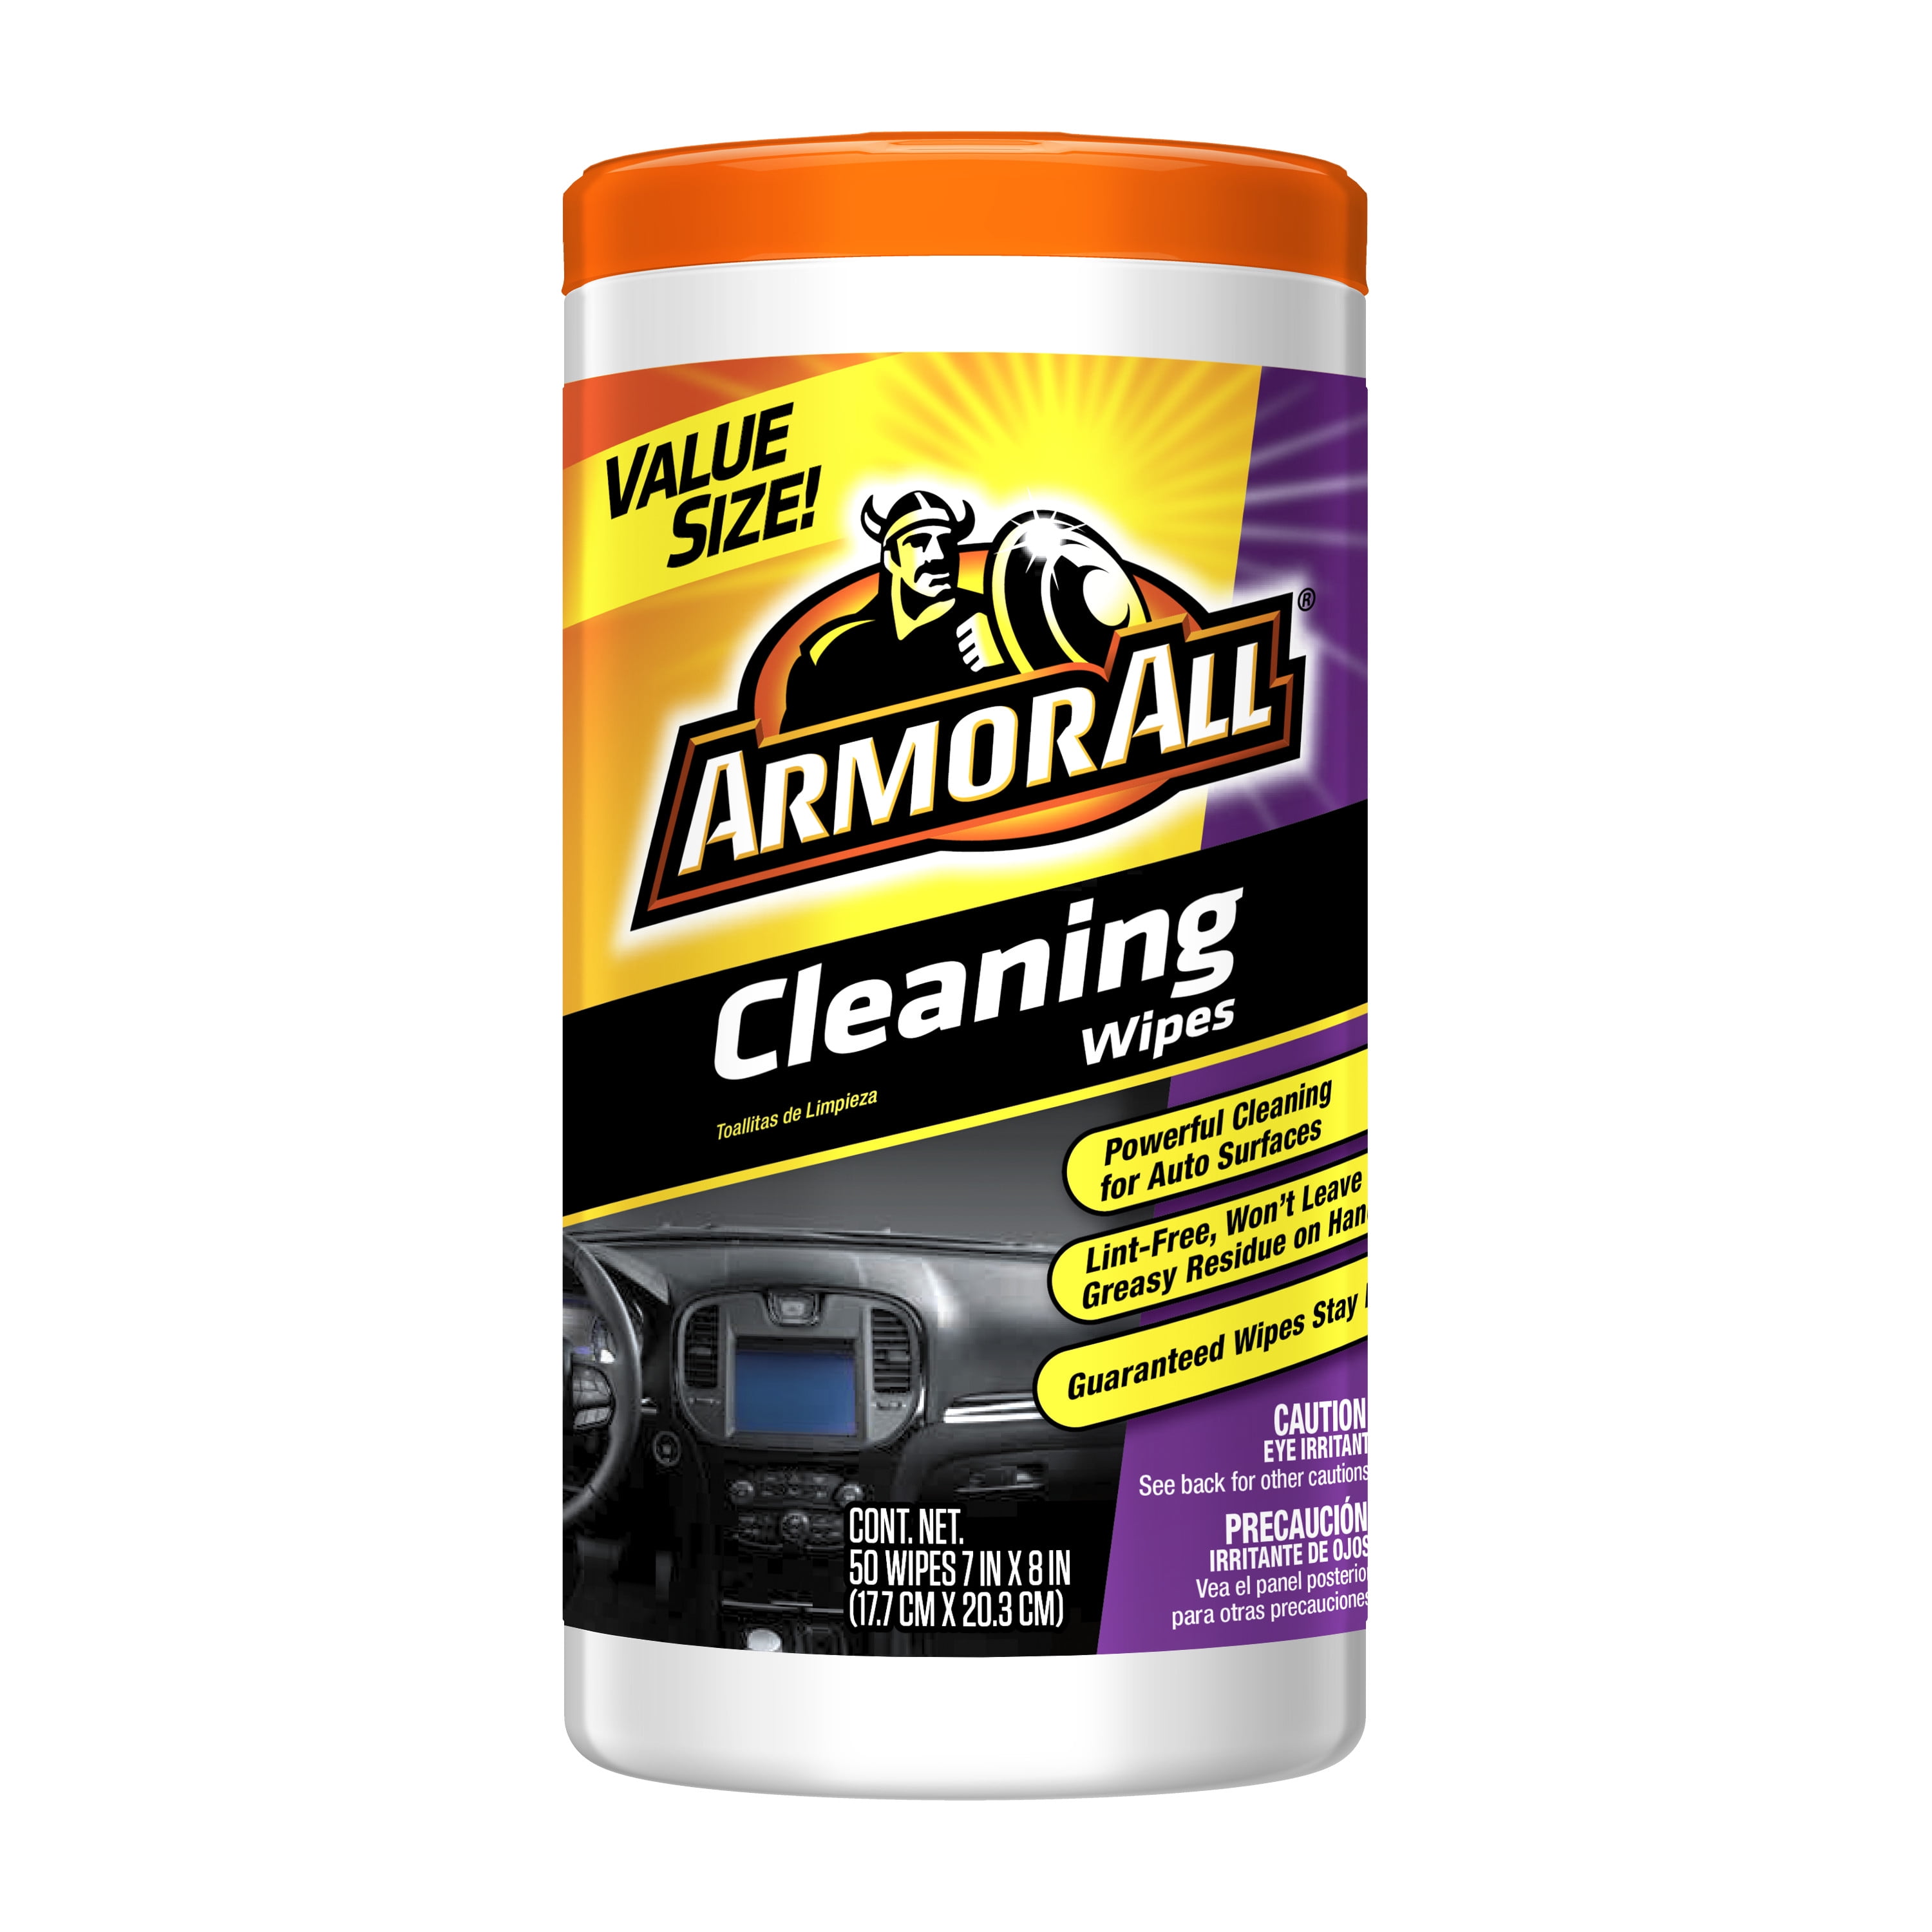 Armor All 8132326 Leather Cleaner, Assorted - 20 Wipes (Pack of 14